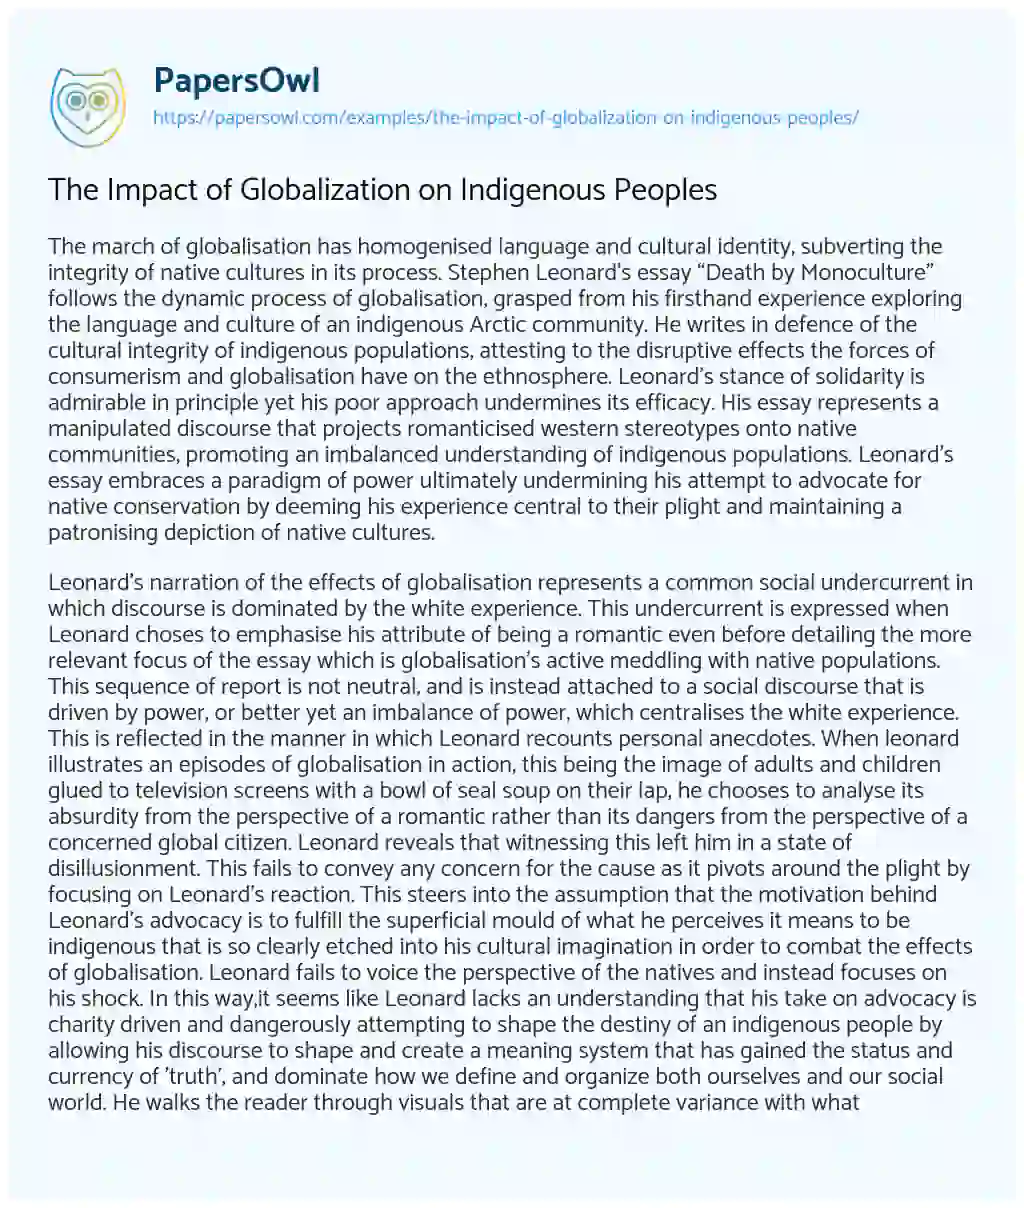 Essay on The Impact of Globalization on Indigenous Peoples